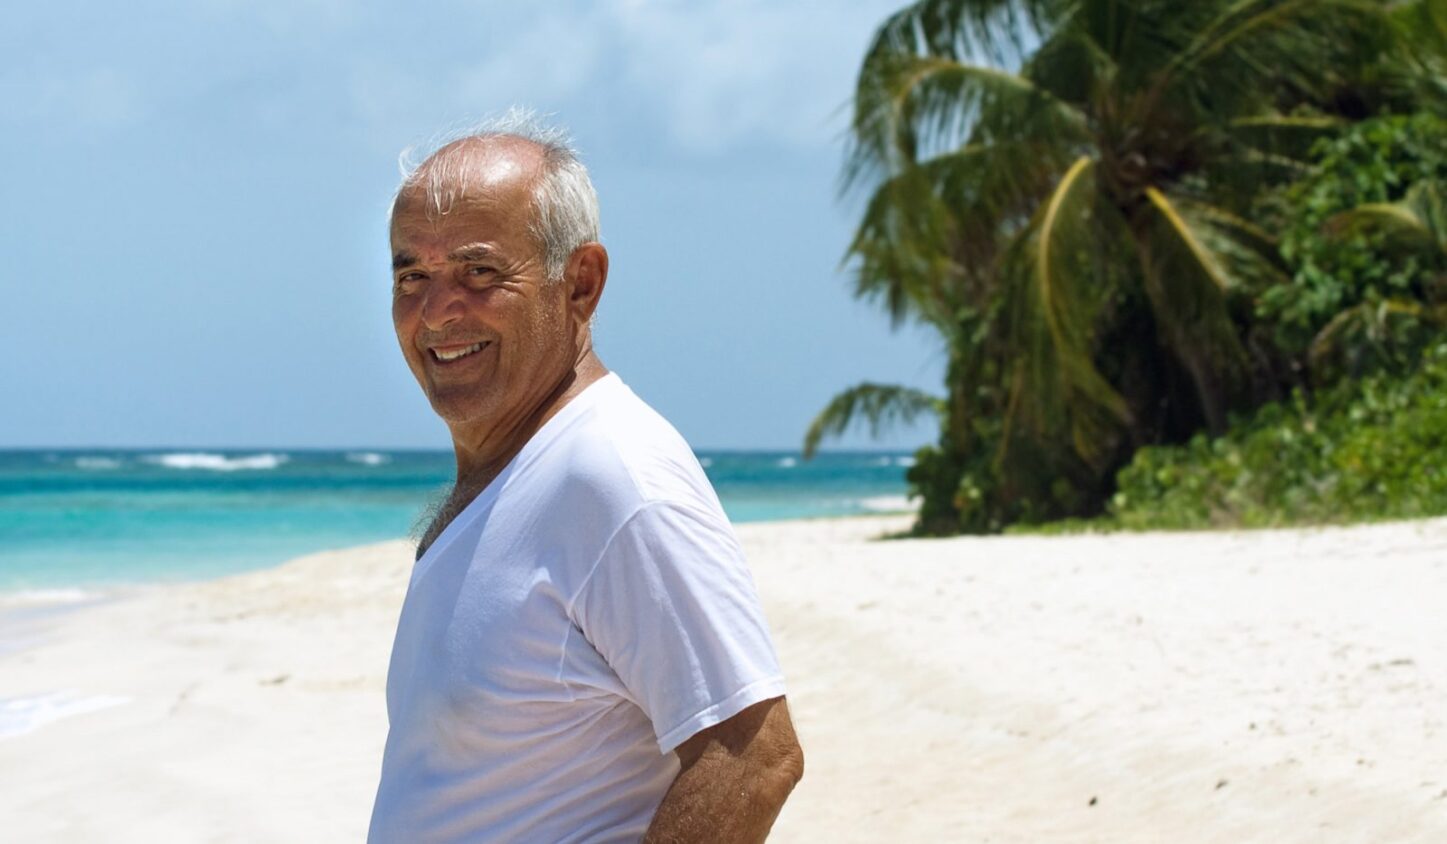 Older Island-Dwelling Puerto Ricans in Better Health Compared to U.S. Older Adults